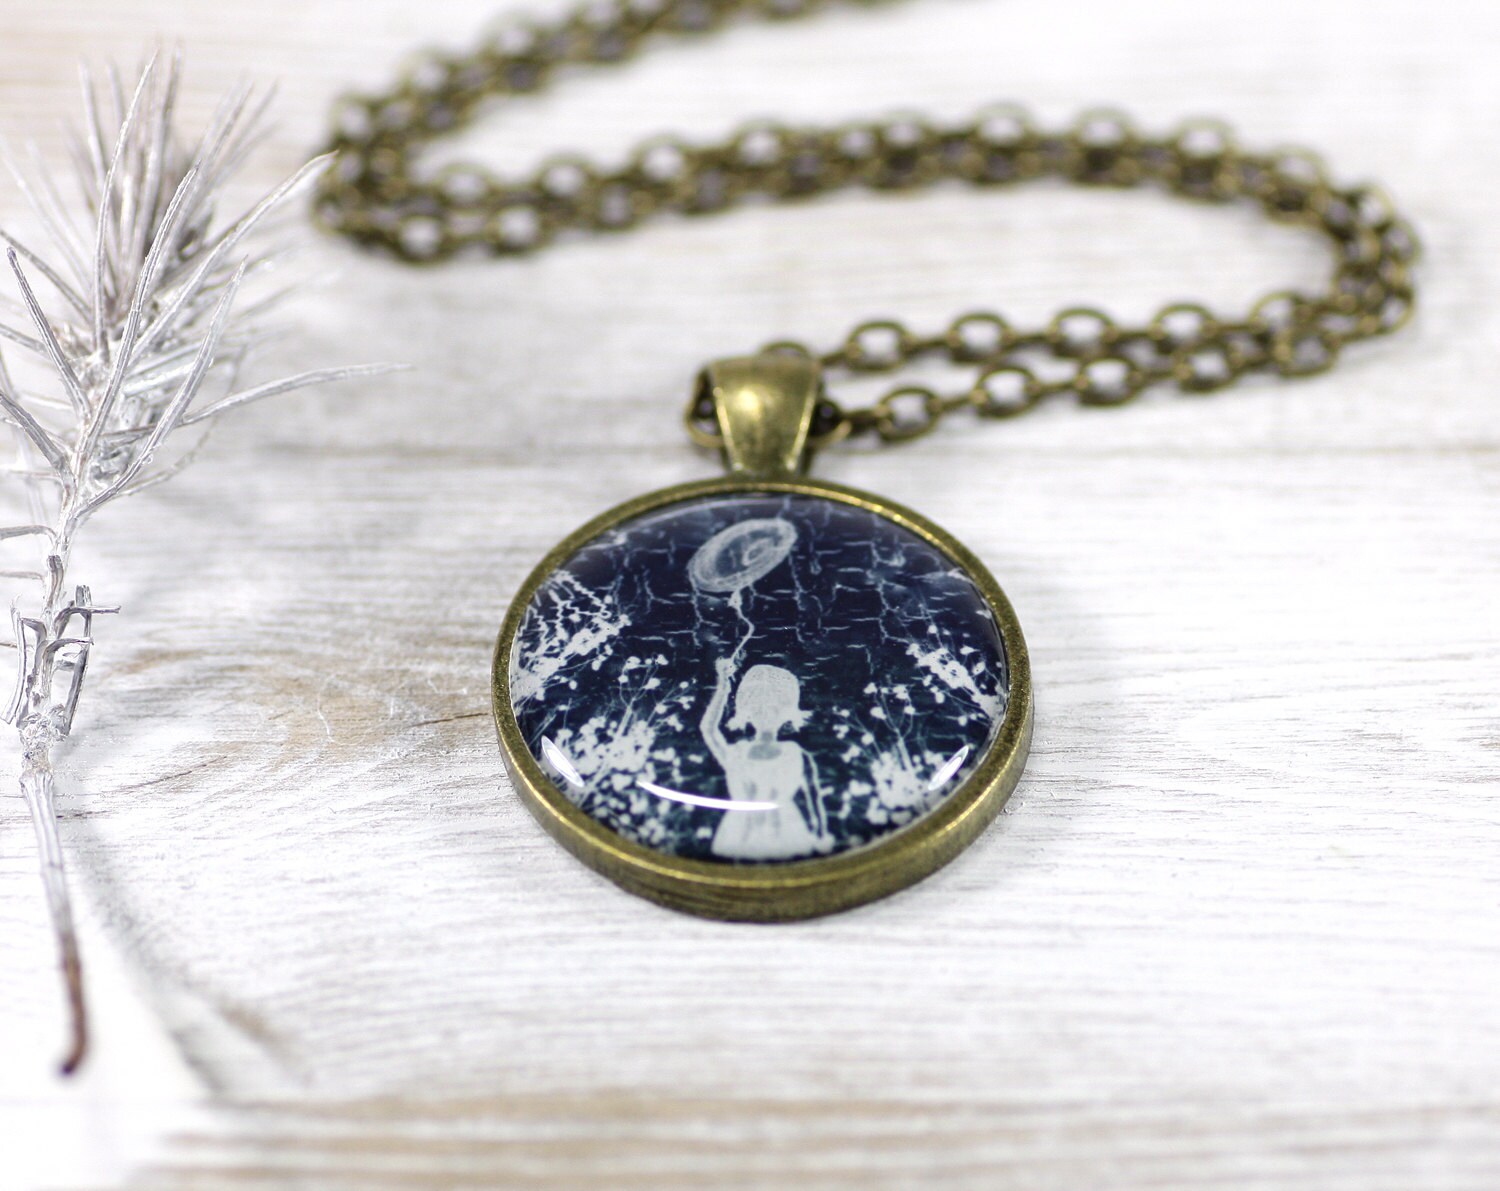 Girl with Balloon Necklace, Pendant, White and Navy Blue, Snow, Woodland (0-46N) Free shipping - CutTheFish